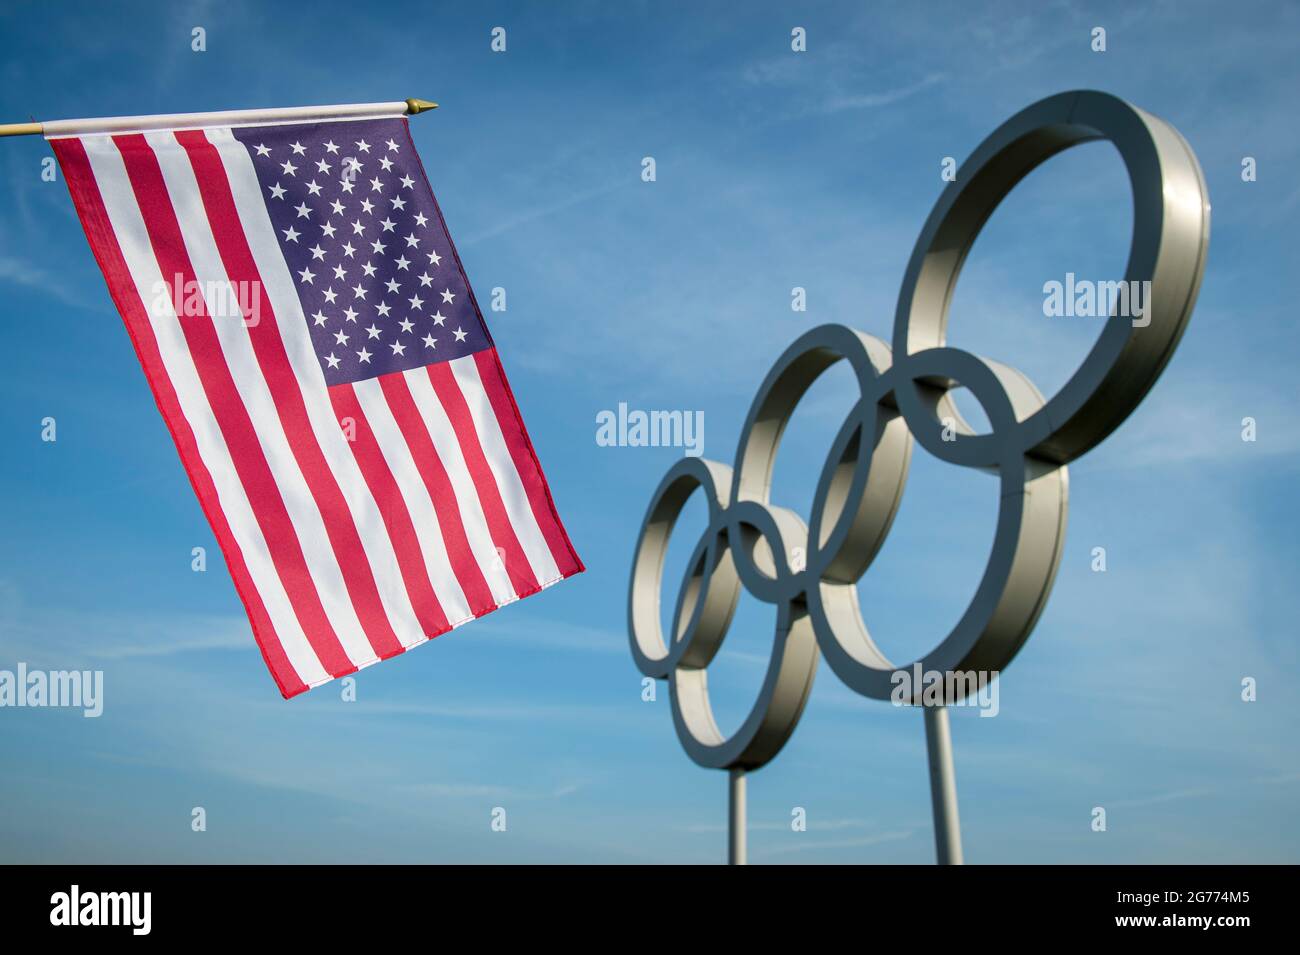 RIO DE JANEIRO - MAY 4, 2016: A stars and strips USA flag in front of Olympic Rings against bright blue Stock Photo